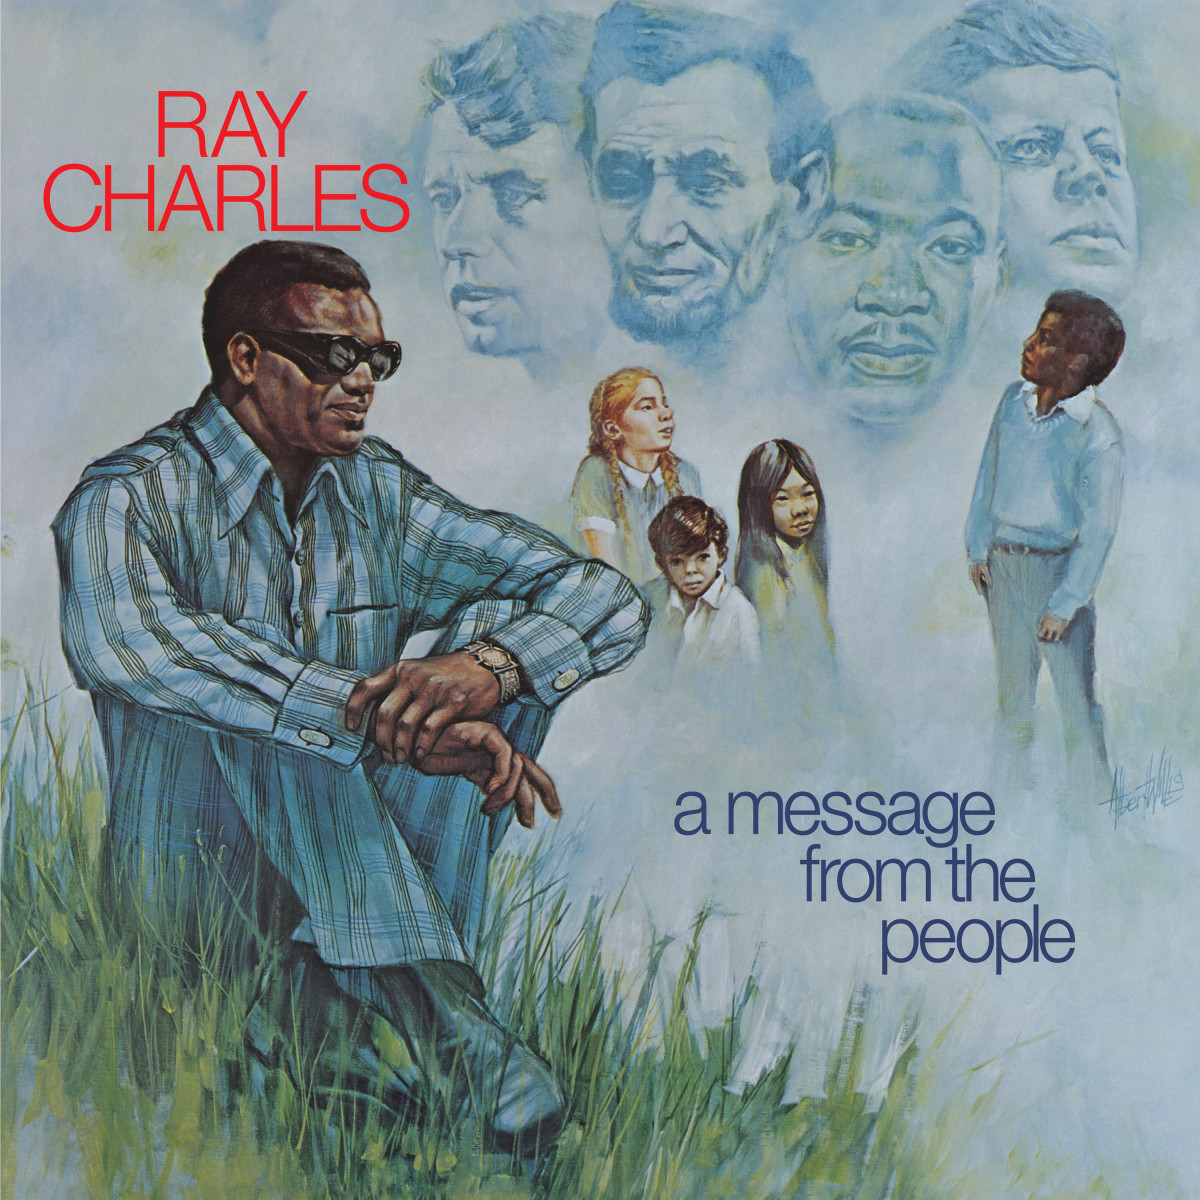 Ray Charles' 1972 LP - A Message from the People